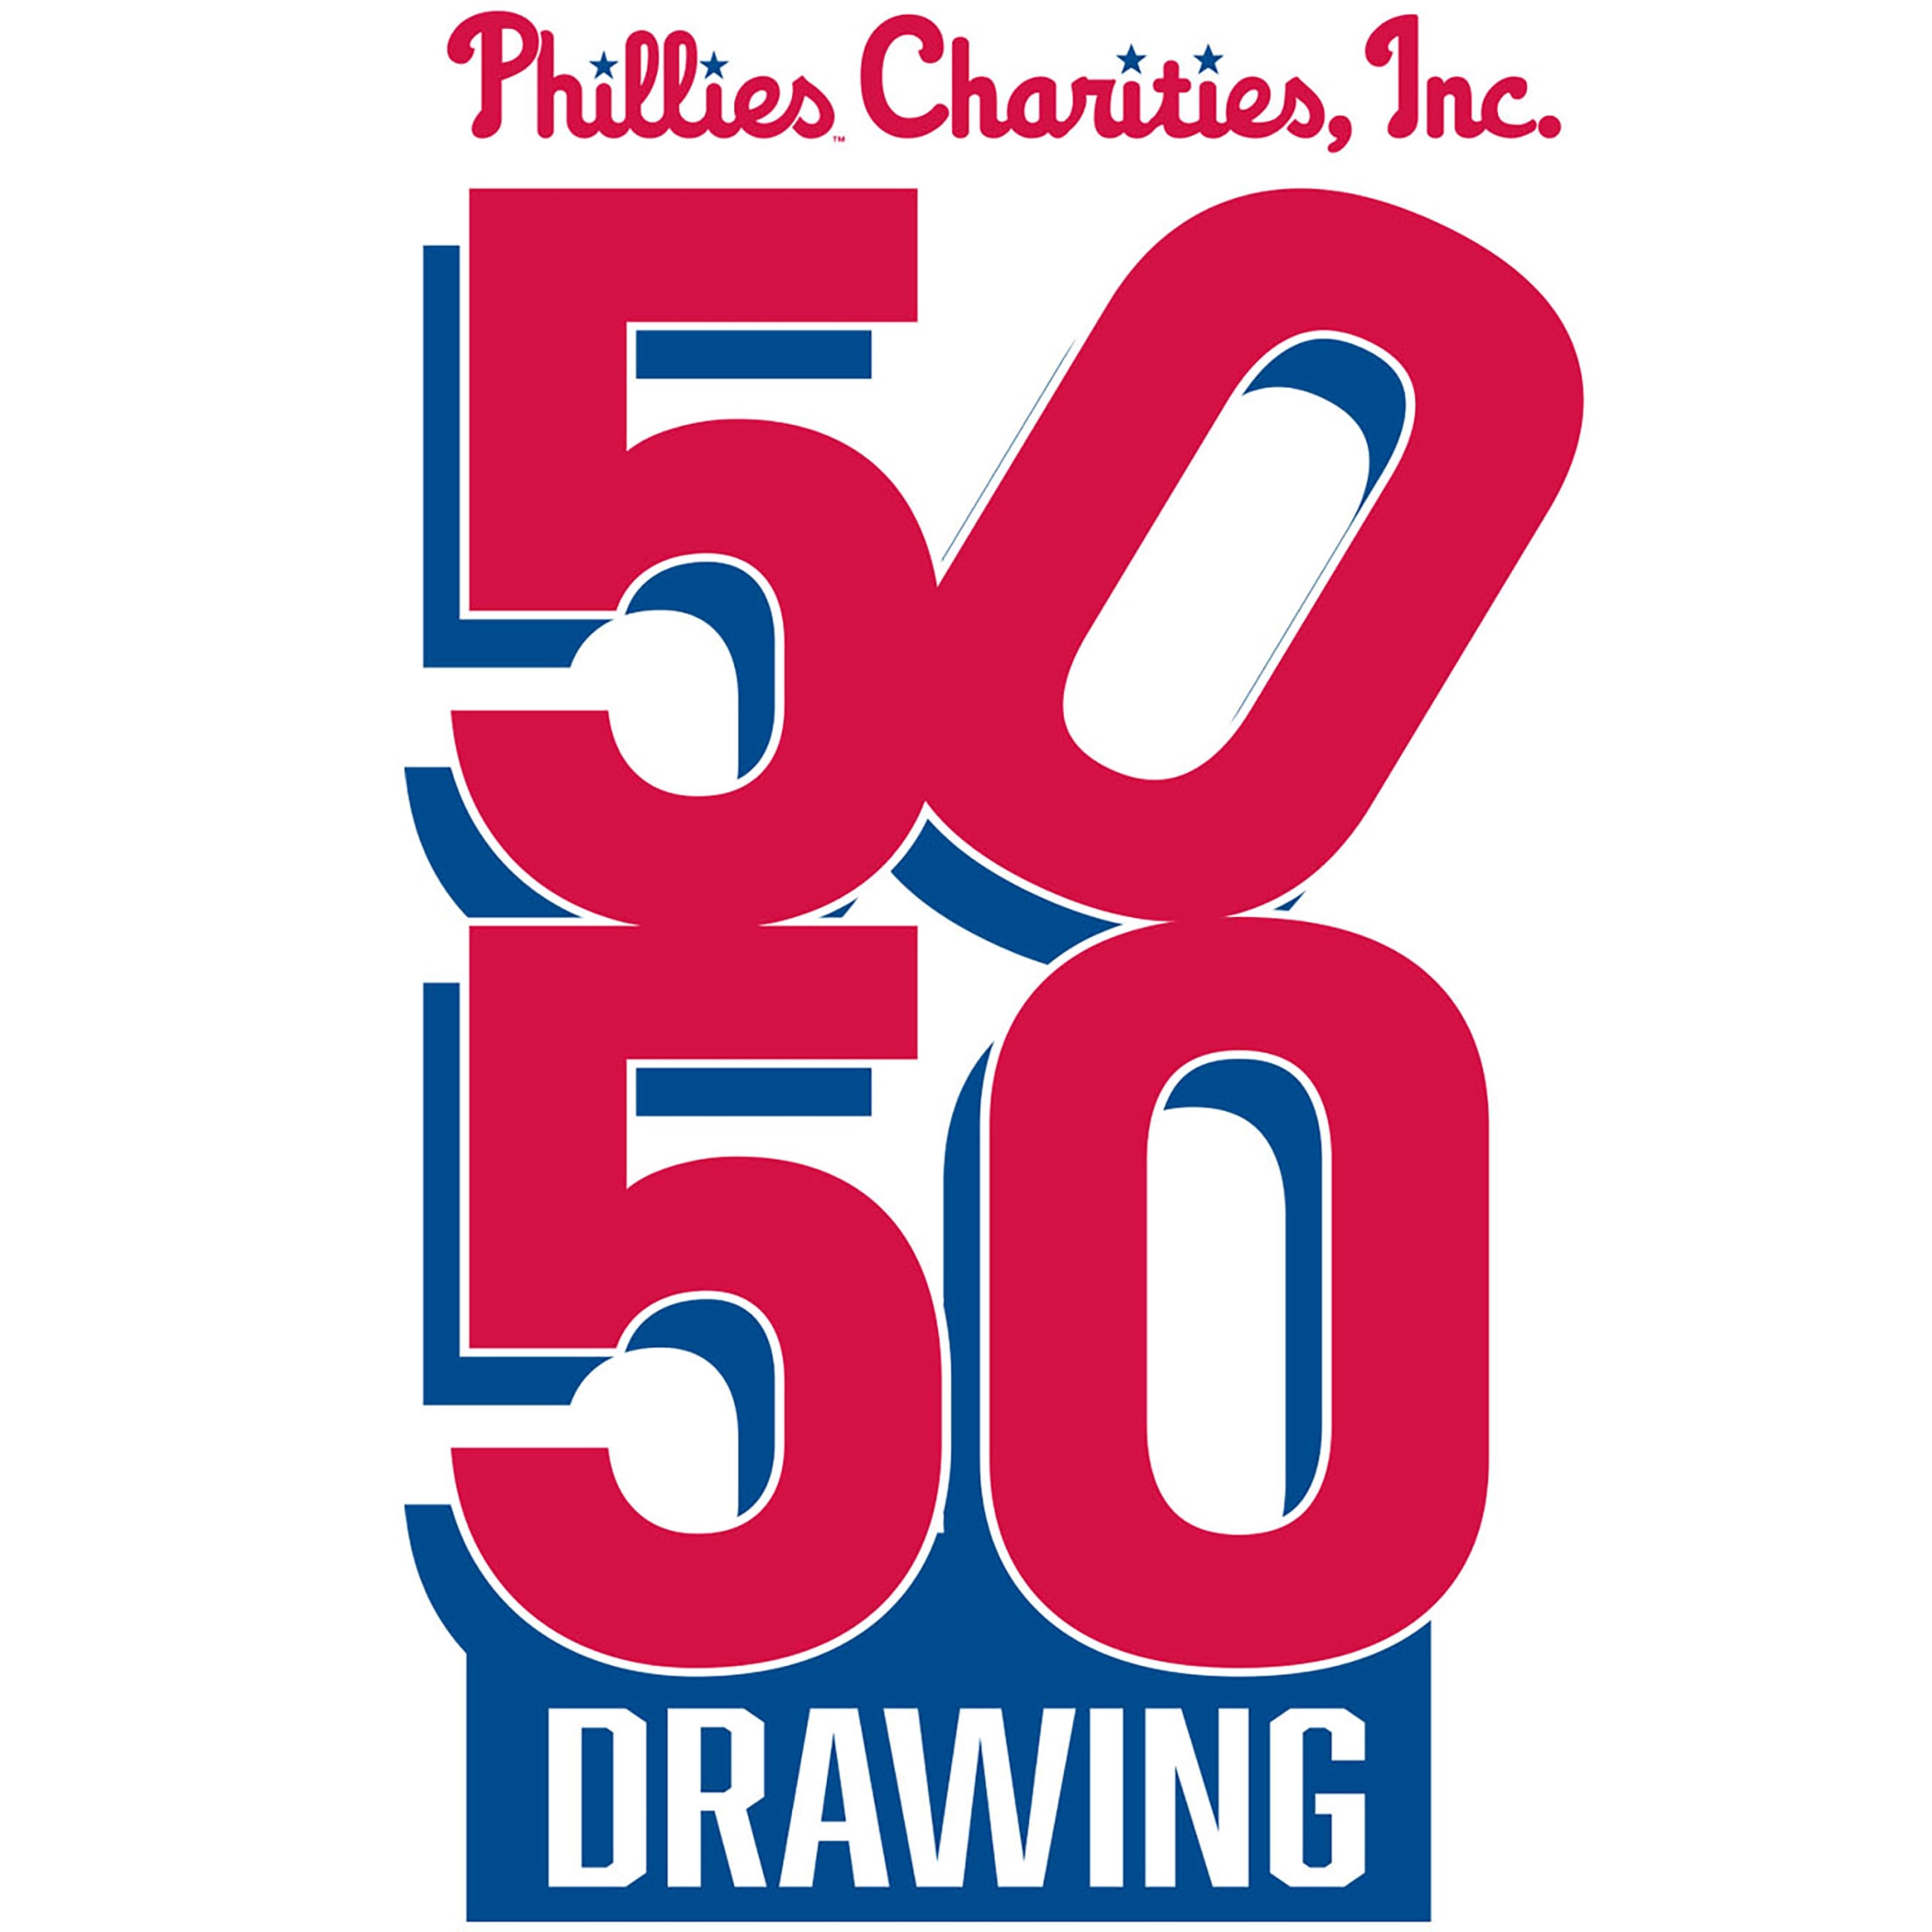 Phillies set a 24-hour sales record for League Championship winner